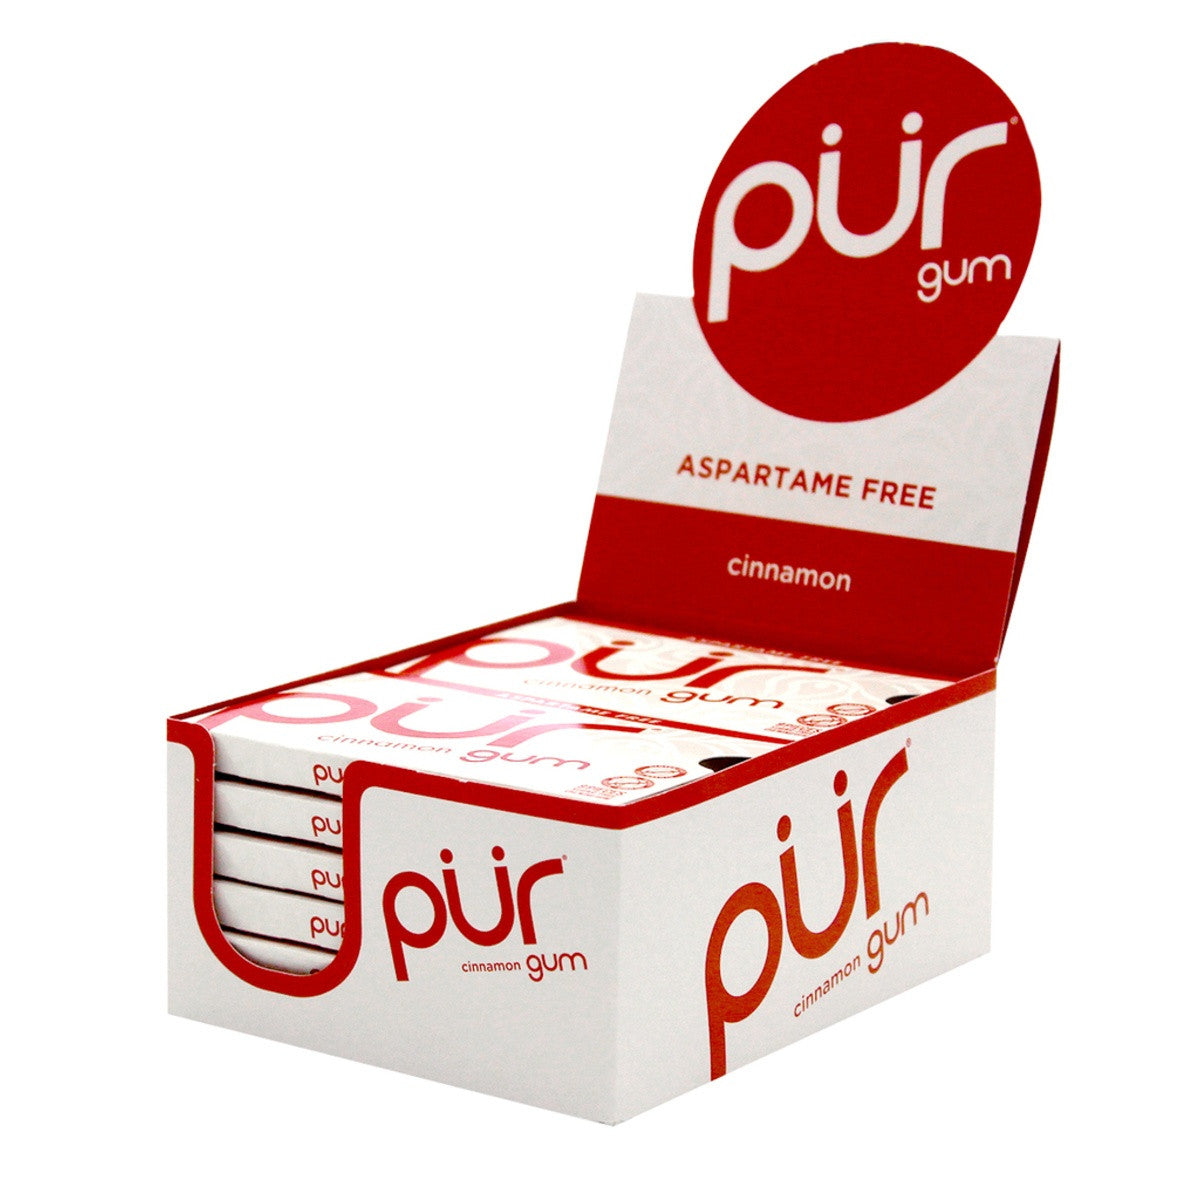 PUR Cinnamon Gum {9 Pieces} Single Pack Or A Box Of 12, Aspartame Free & Gluten Free {Blister Pack}